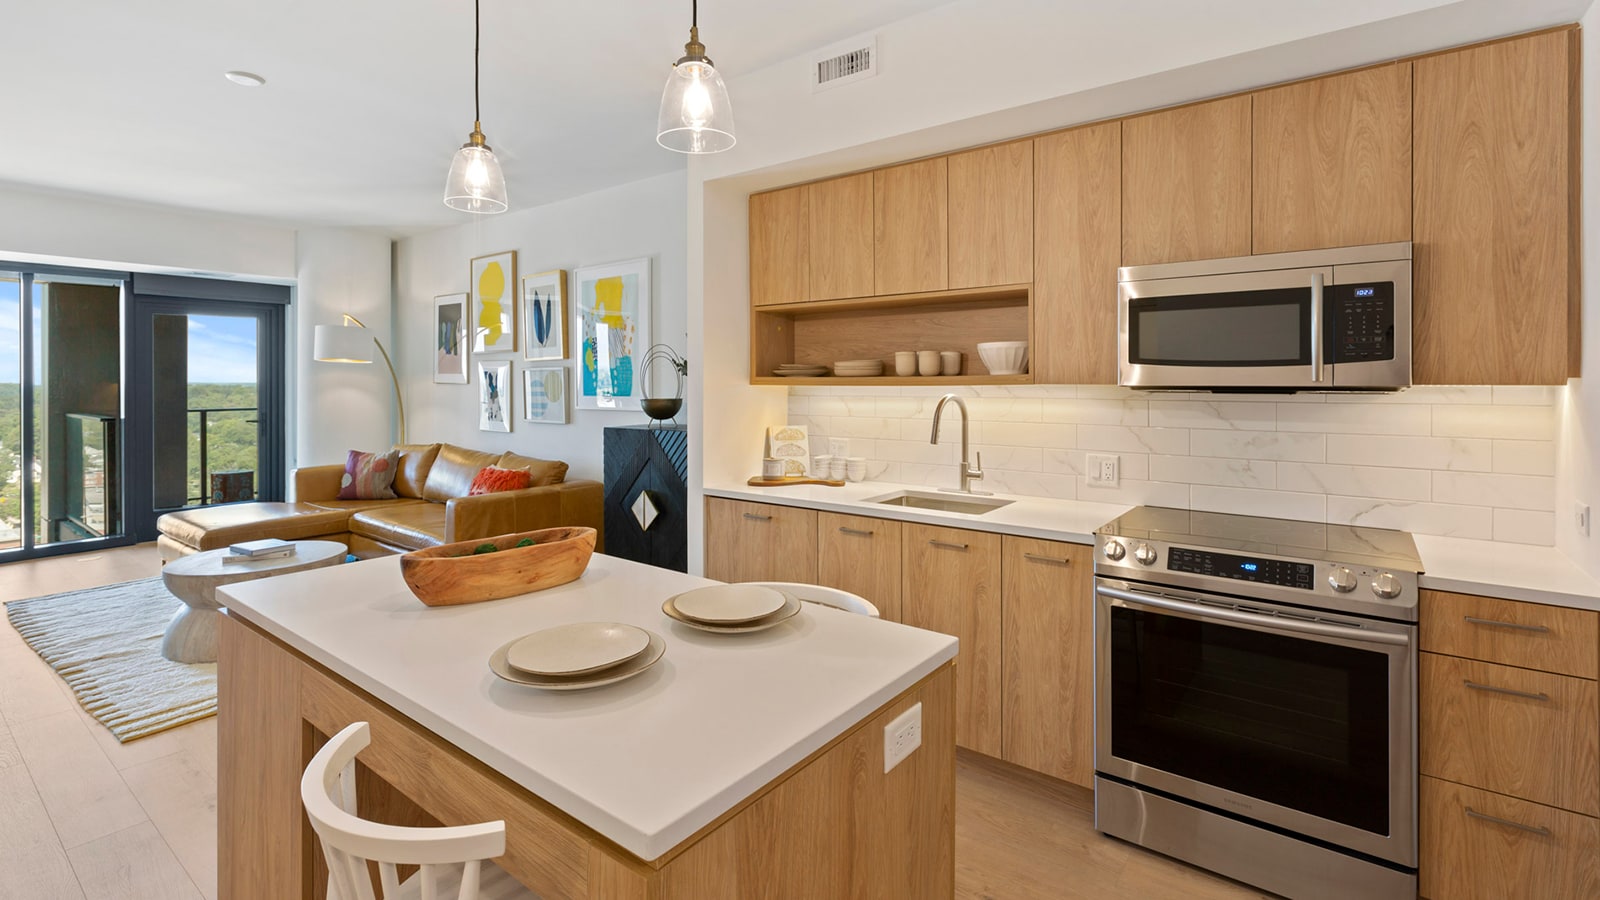 The Elm residential complex: an icon of contemporary design in Washington D.C.